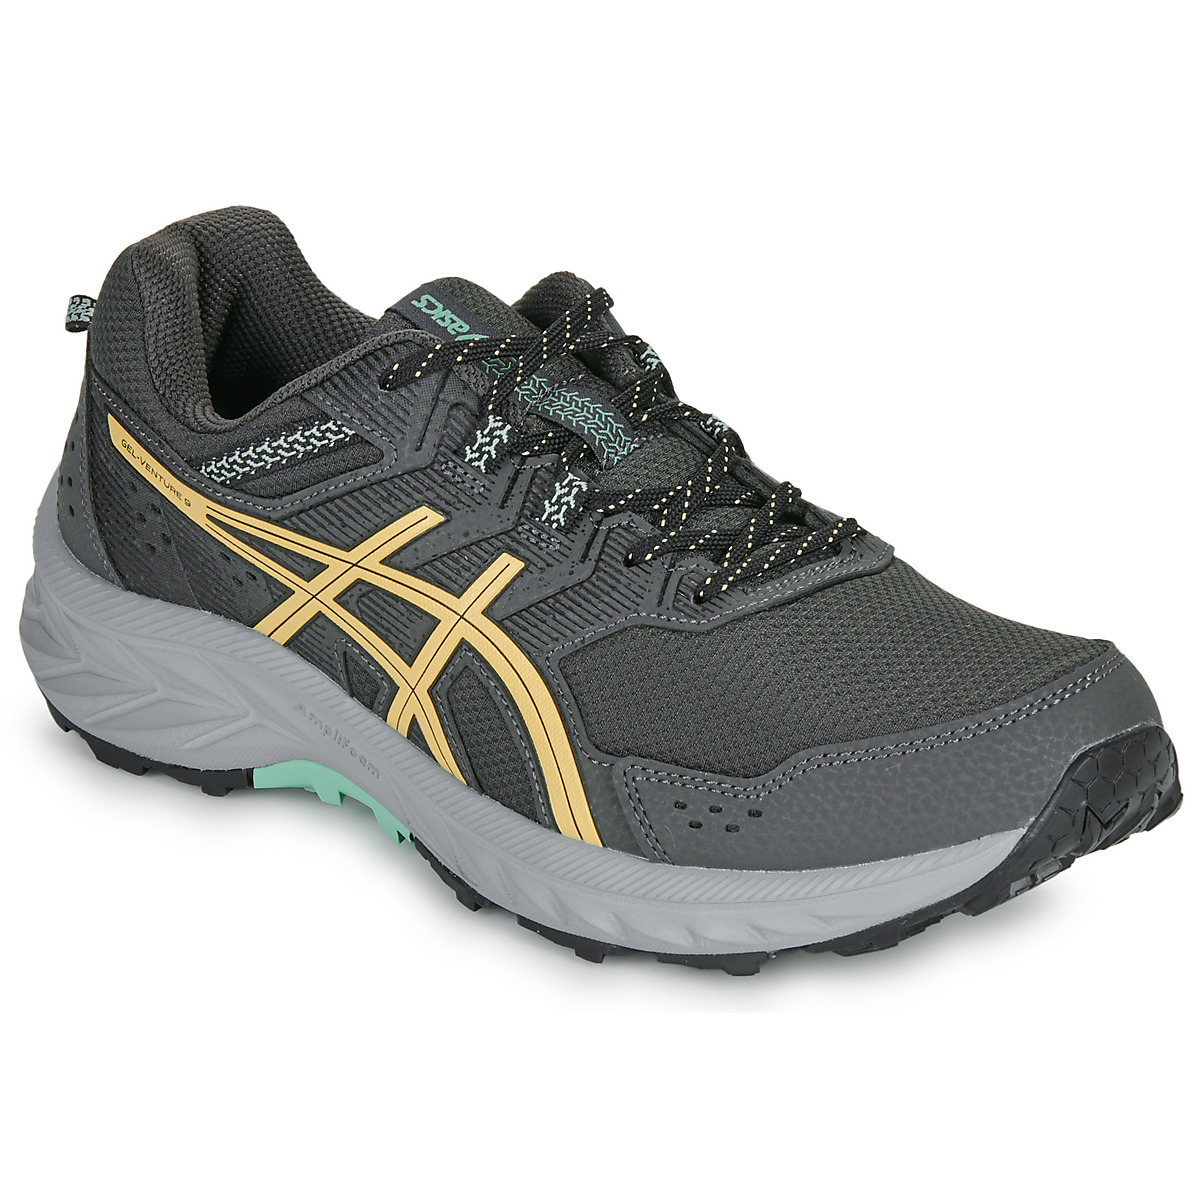 Chaussures Homme Asics Authentic Gel-Game 8 Clay OC Buty GEL-VENTURE 9 Gris / Jaune